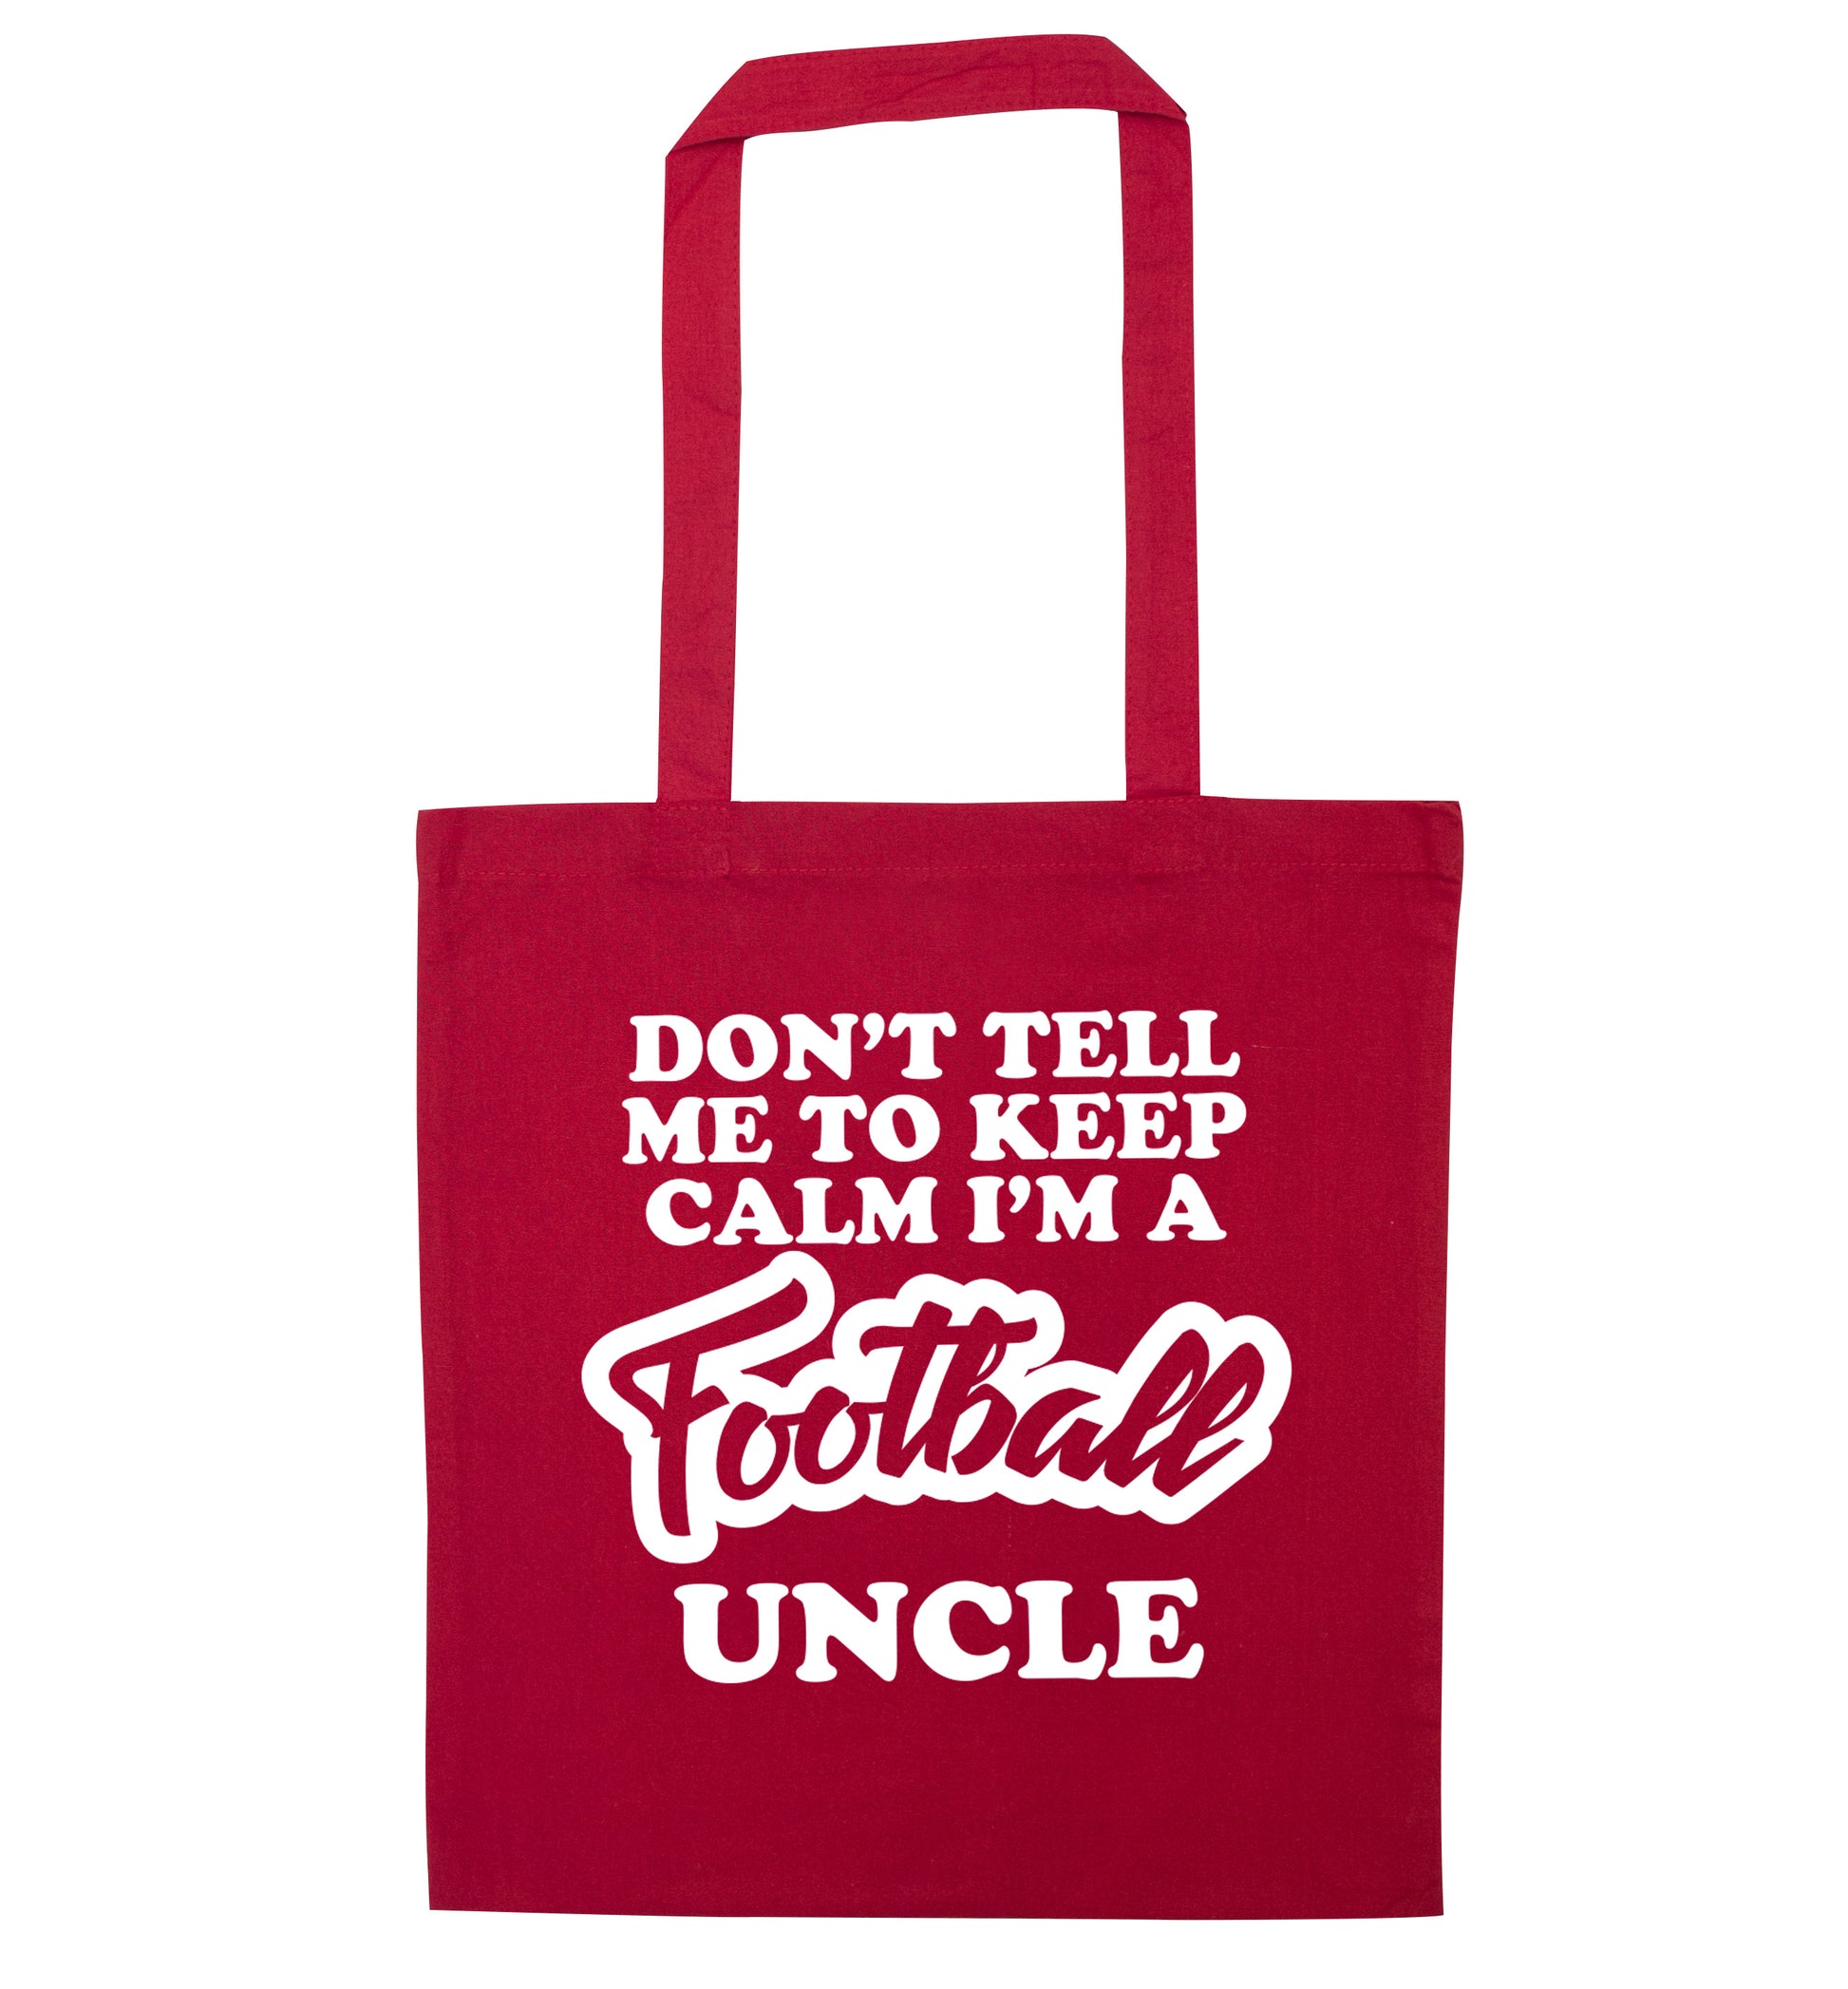 Don't tell me to keep calm I'm a football uncle red tote bag